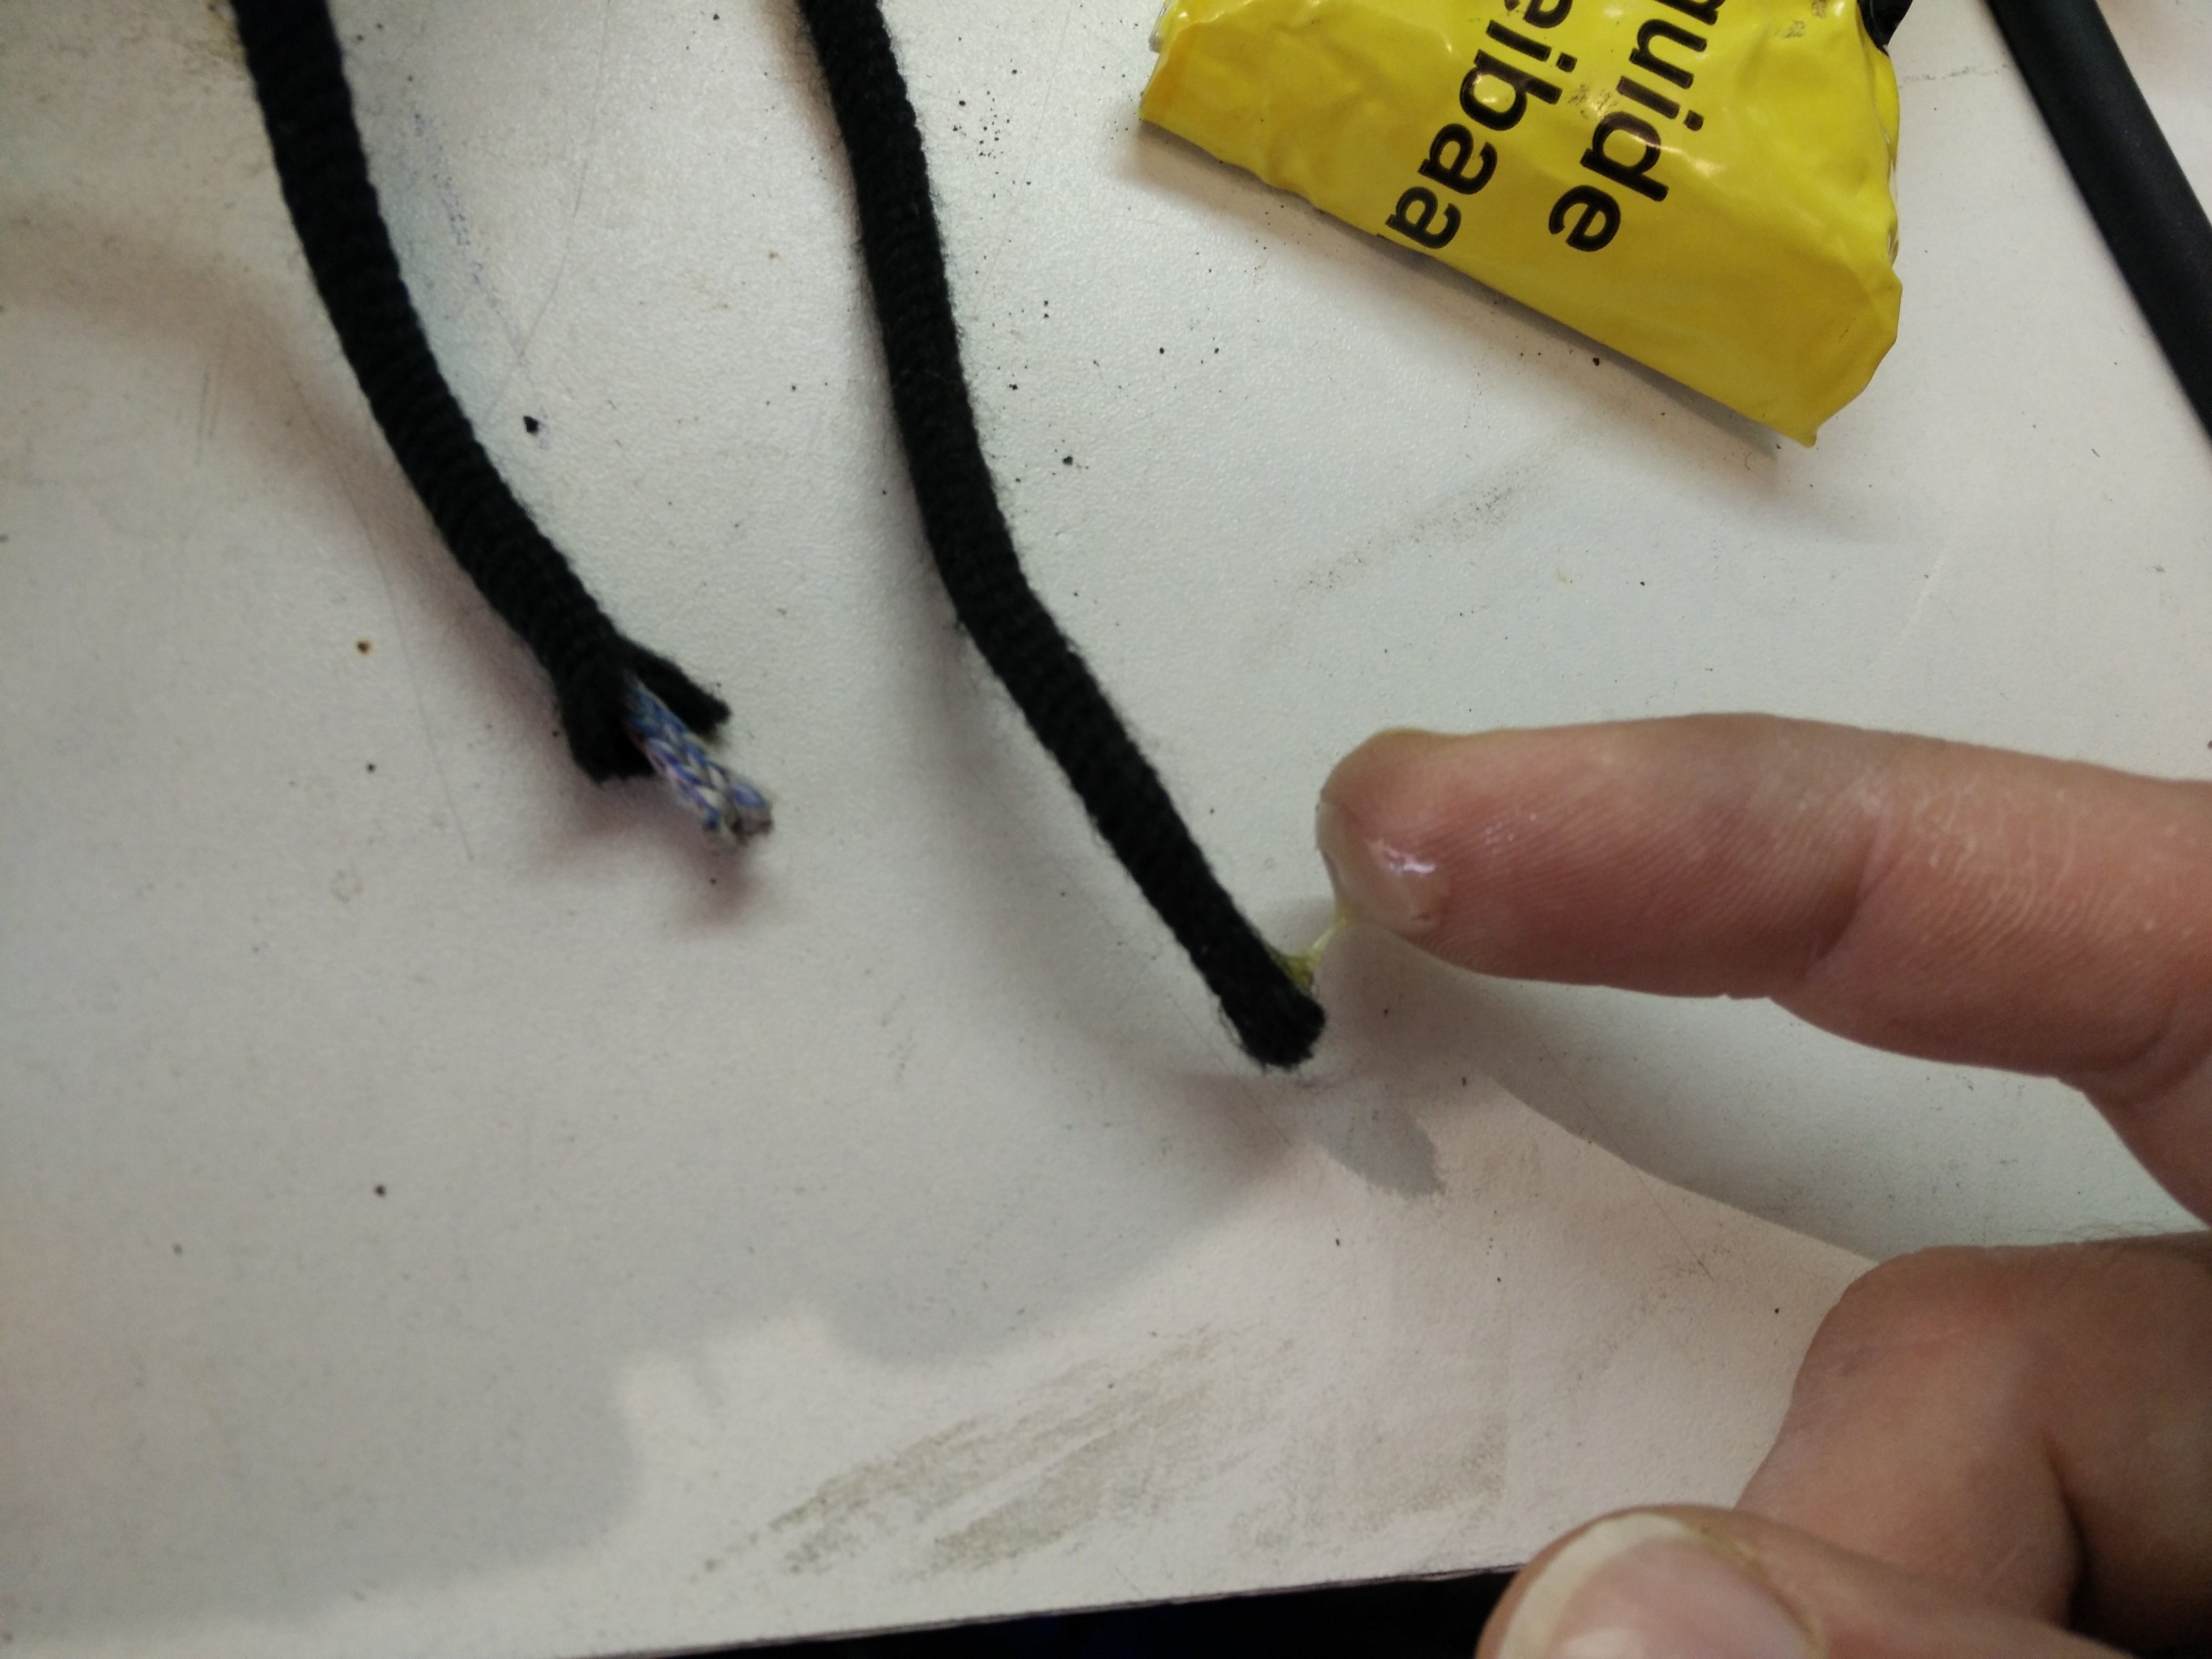 Fix fraying shoelaces with heat shrink tubing | LectroLeevin Heat Shrink Tubing For Shoelaces